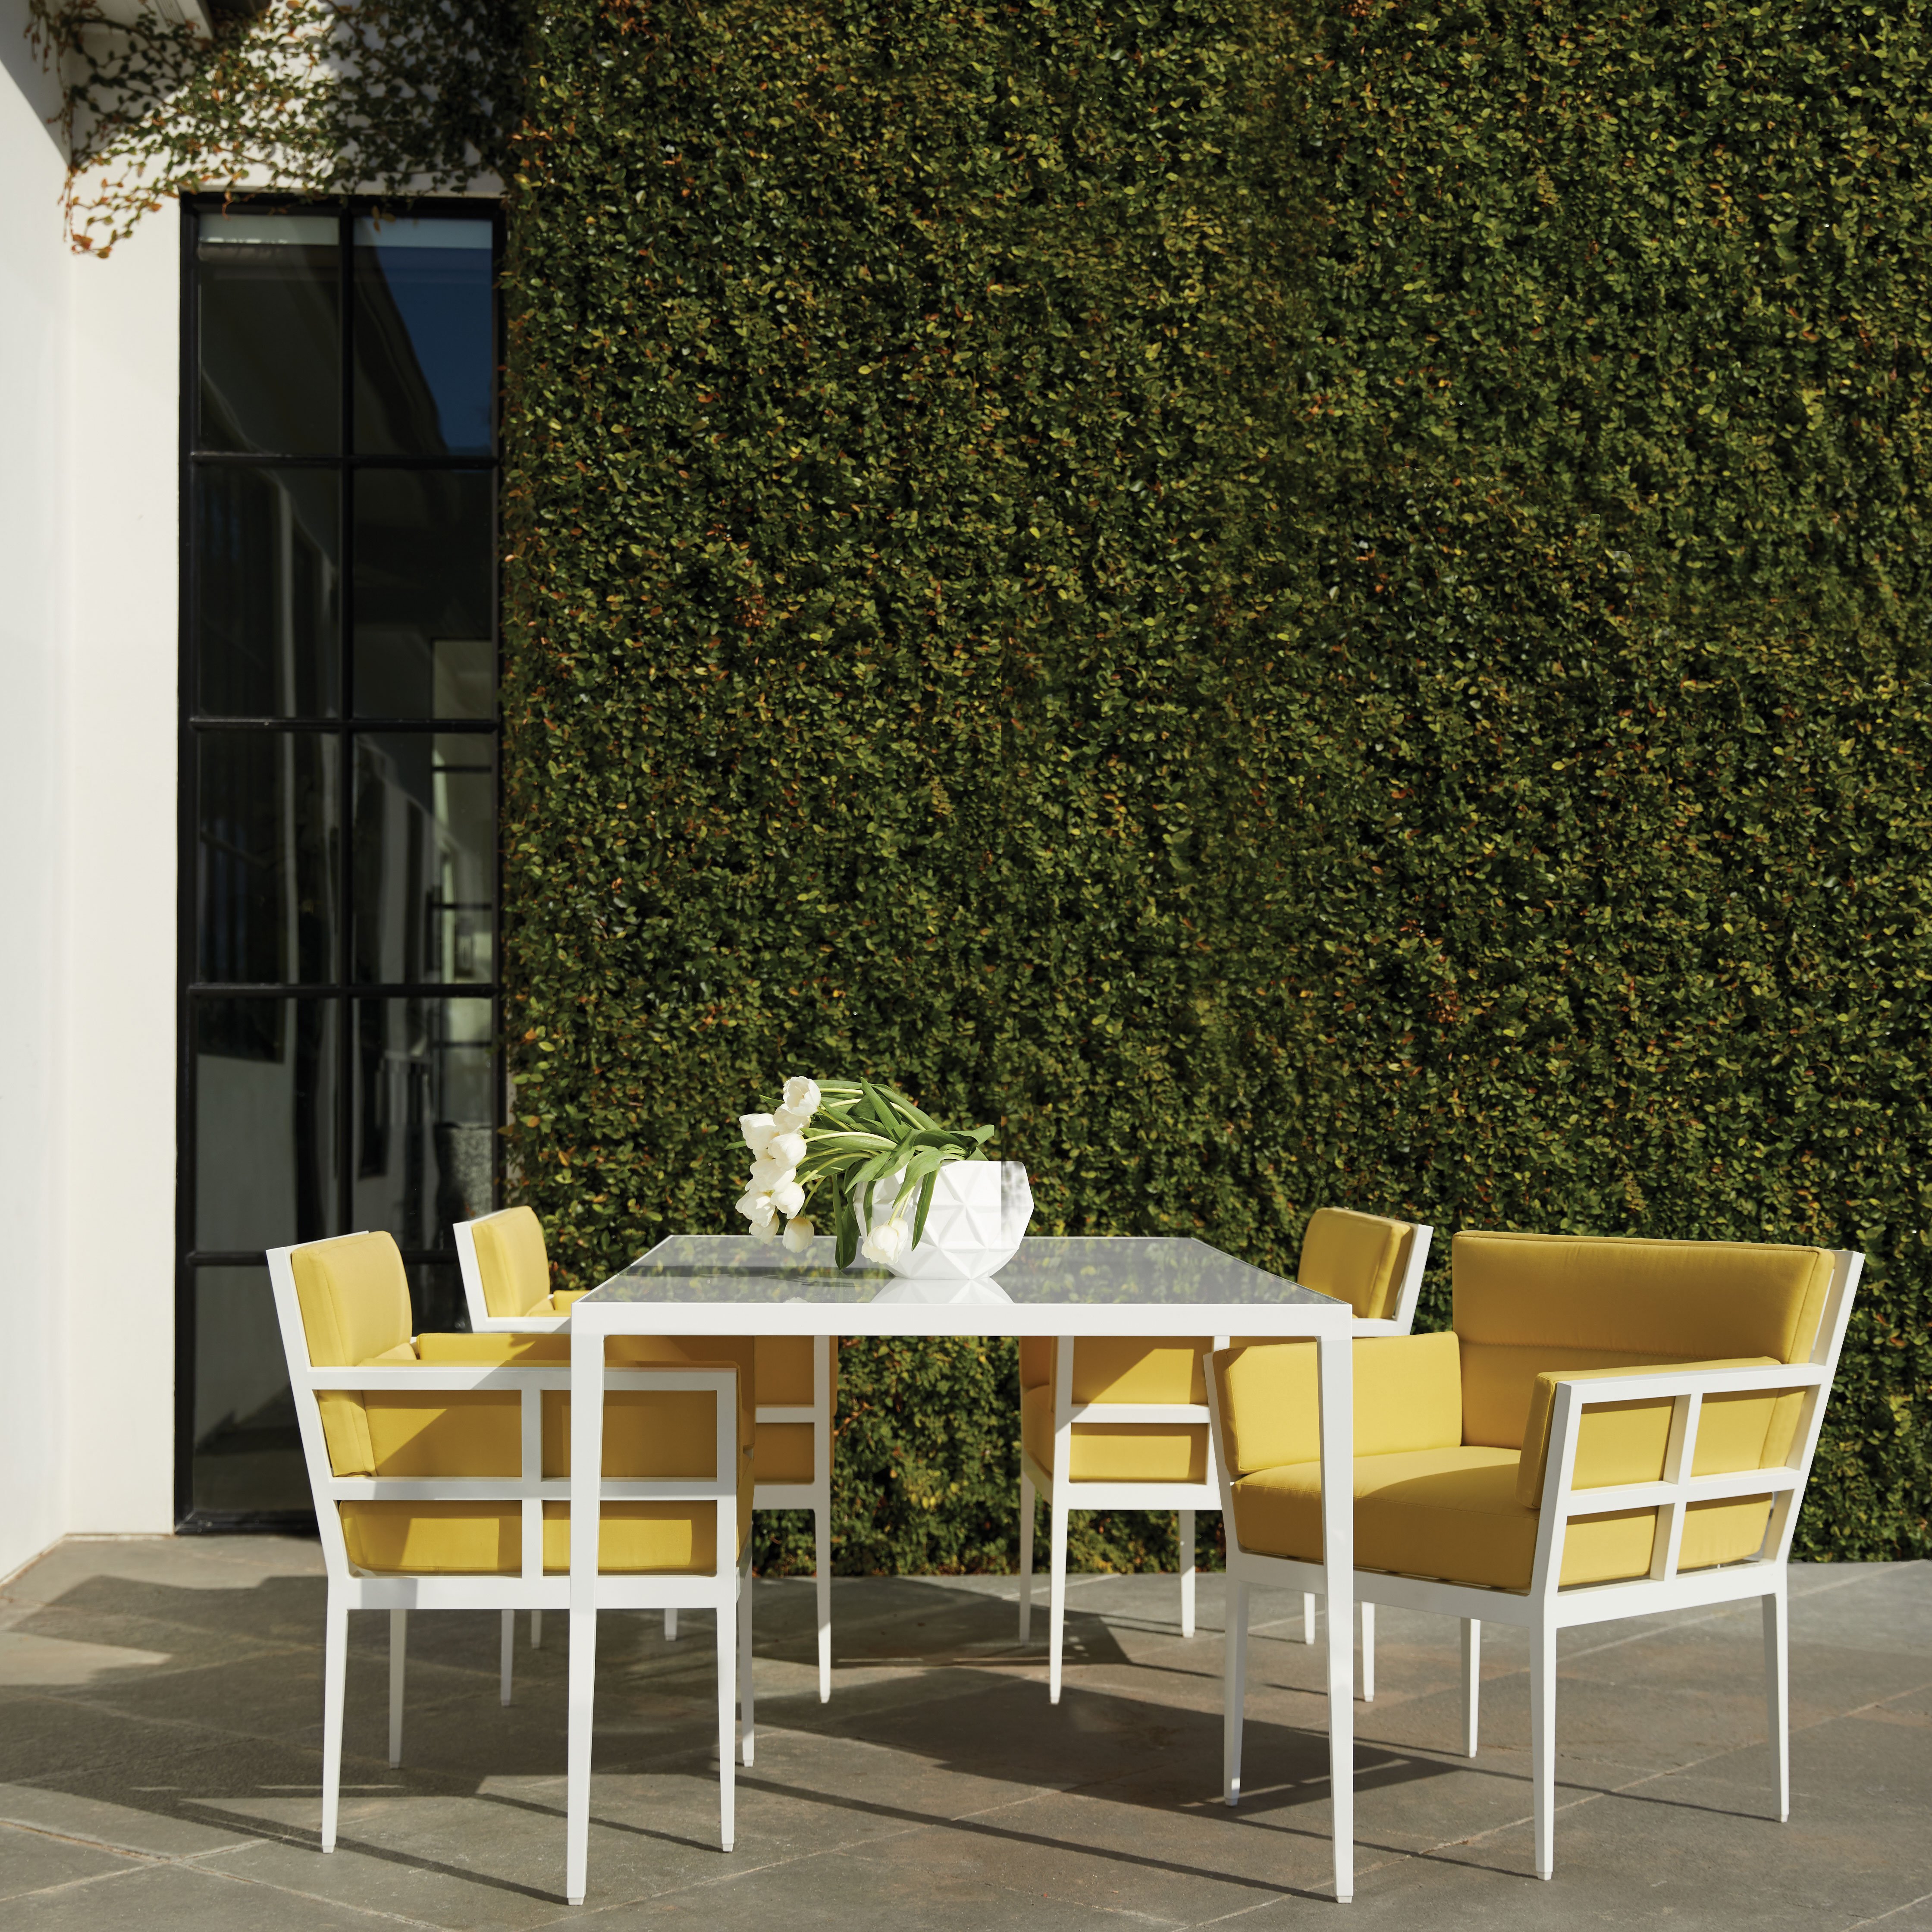 Haworth Slant table with white top in an outdoor patio area with a flower centerpiece 